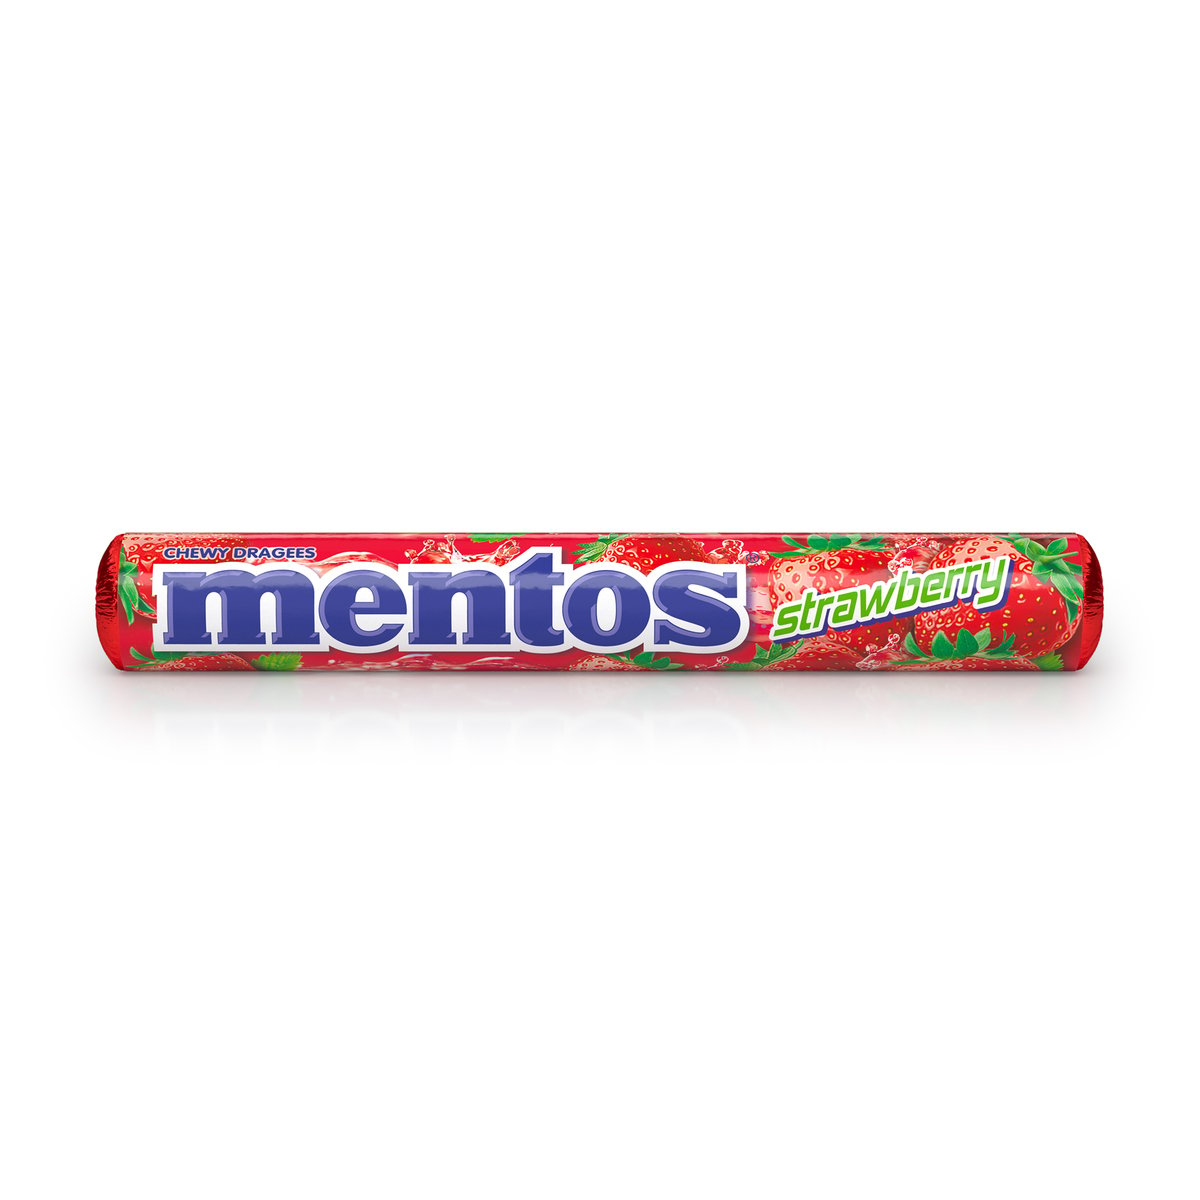 Mentos Chewy Candy Strawberry Flavour 37 g